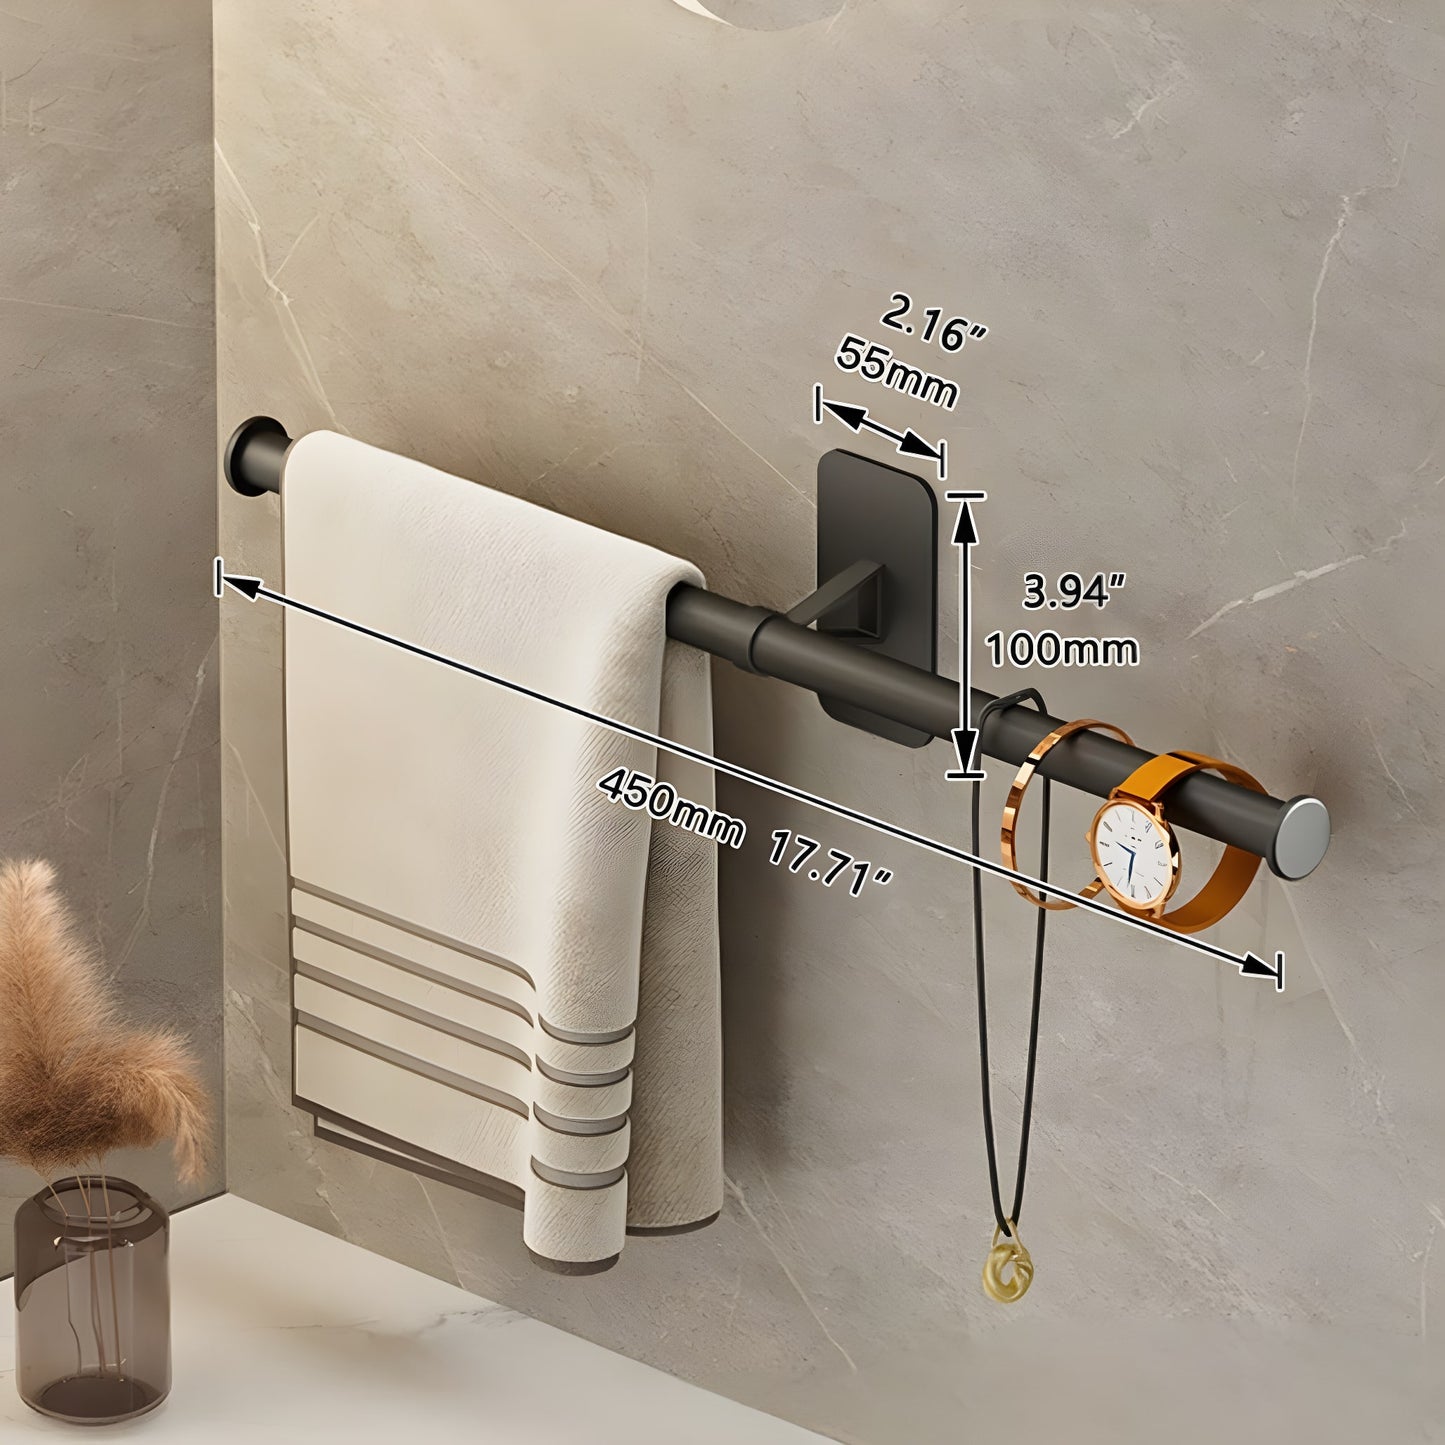 Wall-mounted bathroom accessories for organization